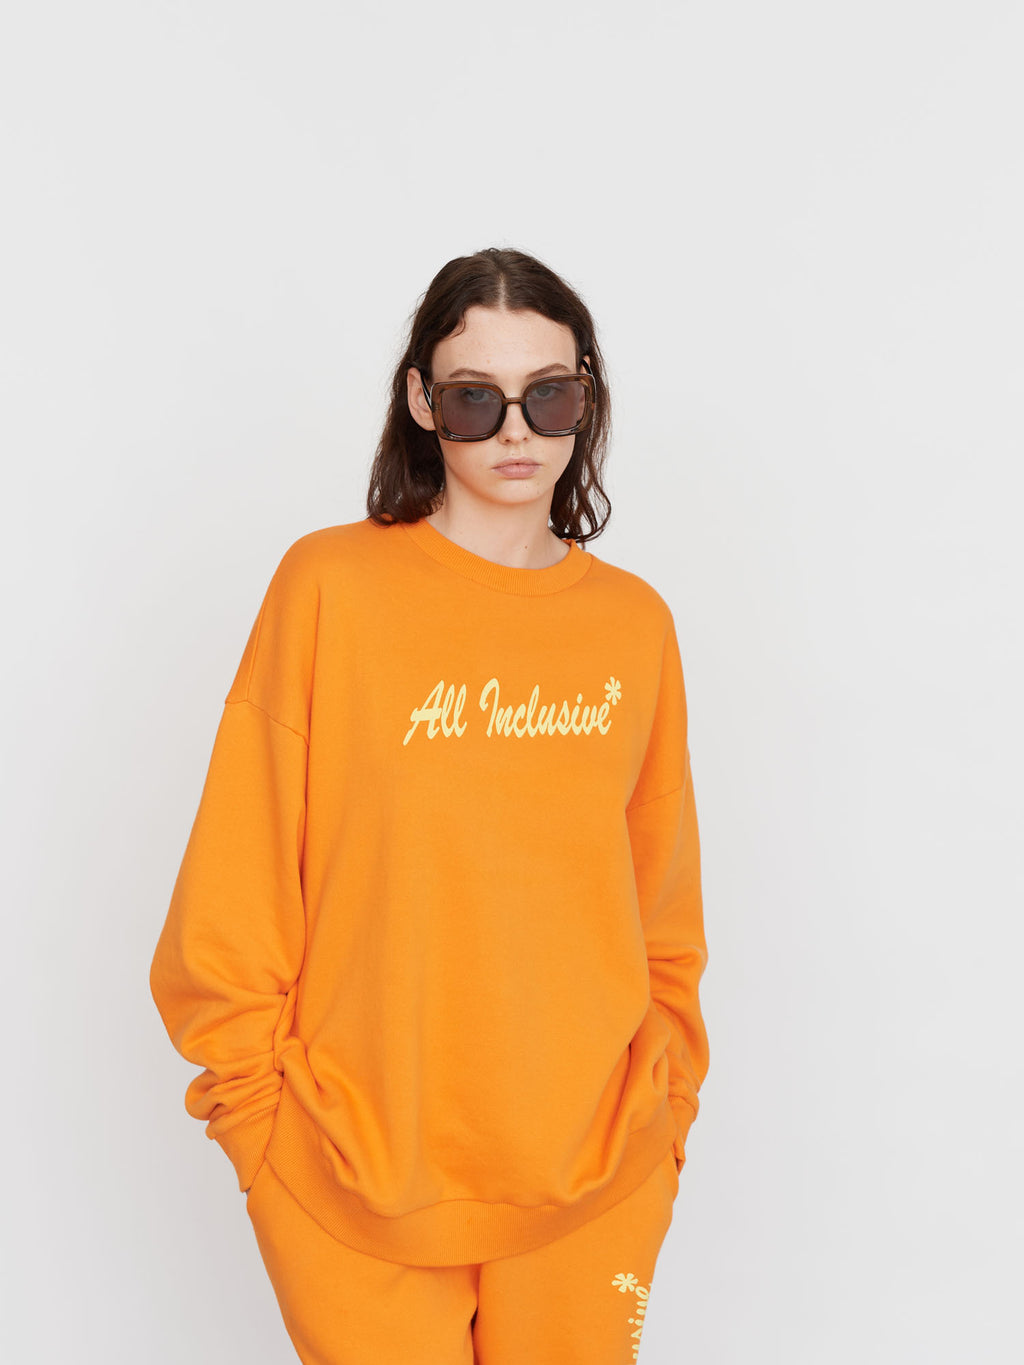 collection-lazy-hotel-1, collection-womens, collection-men-new-in-1, collection-mens-co-ords, collection-womens-hoodies-sweatshirts, collection-sale